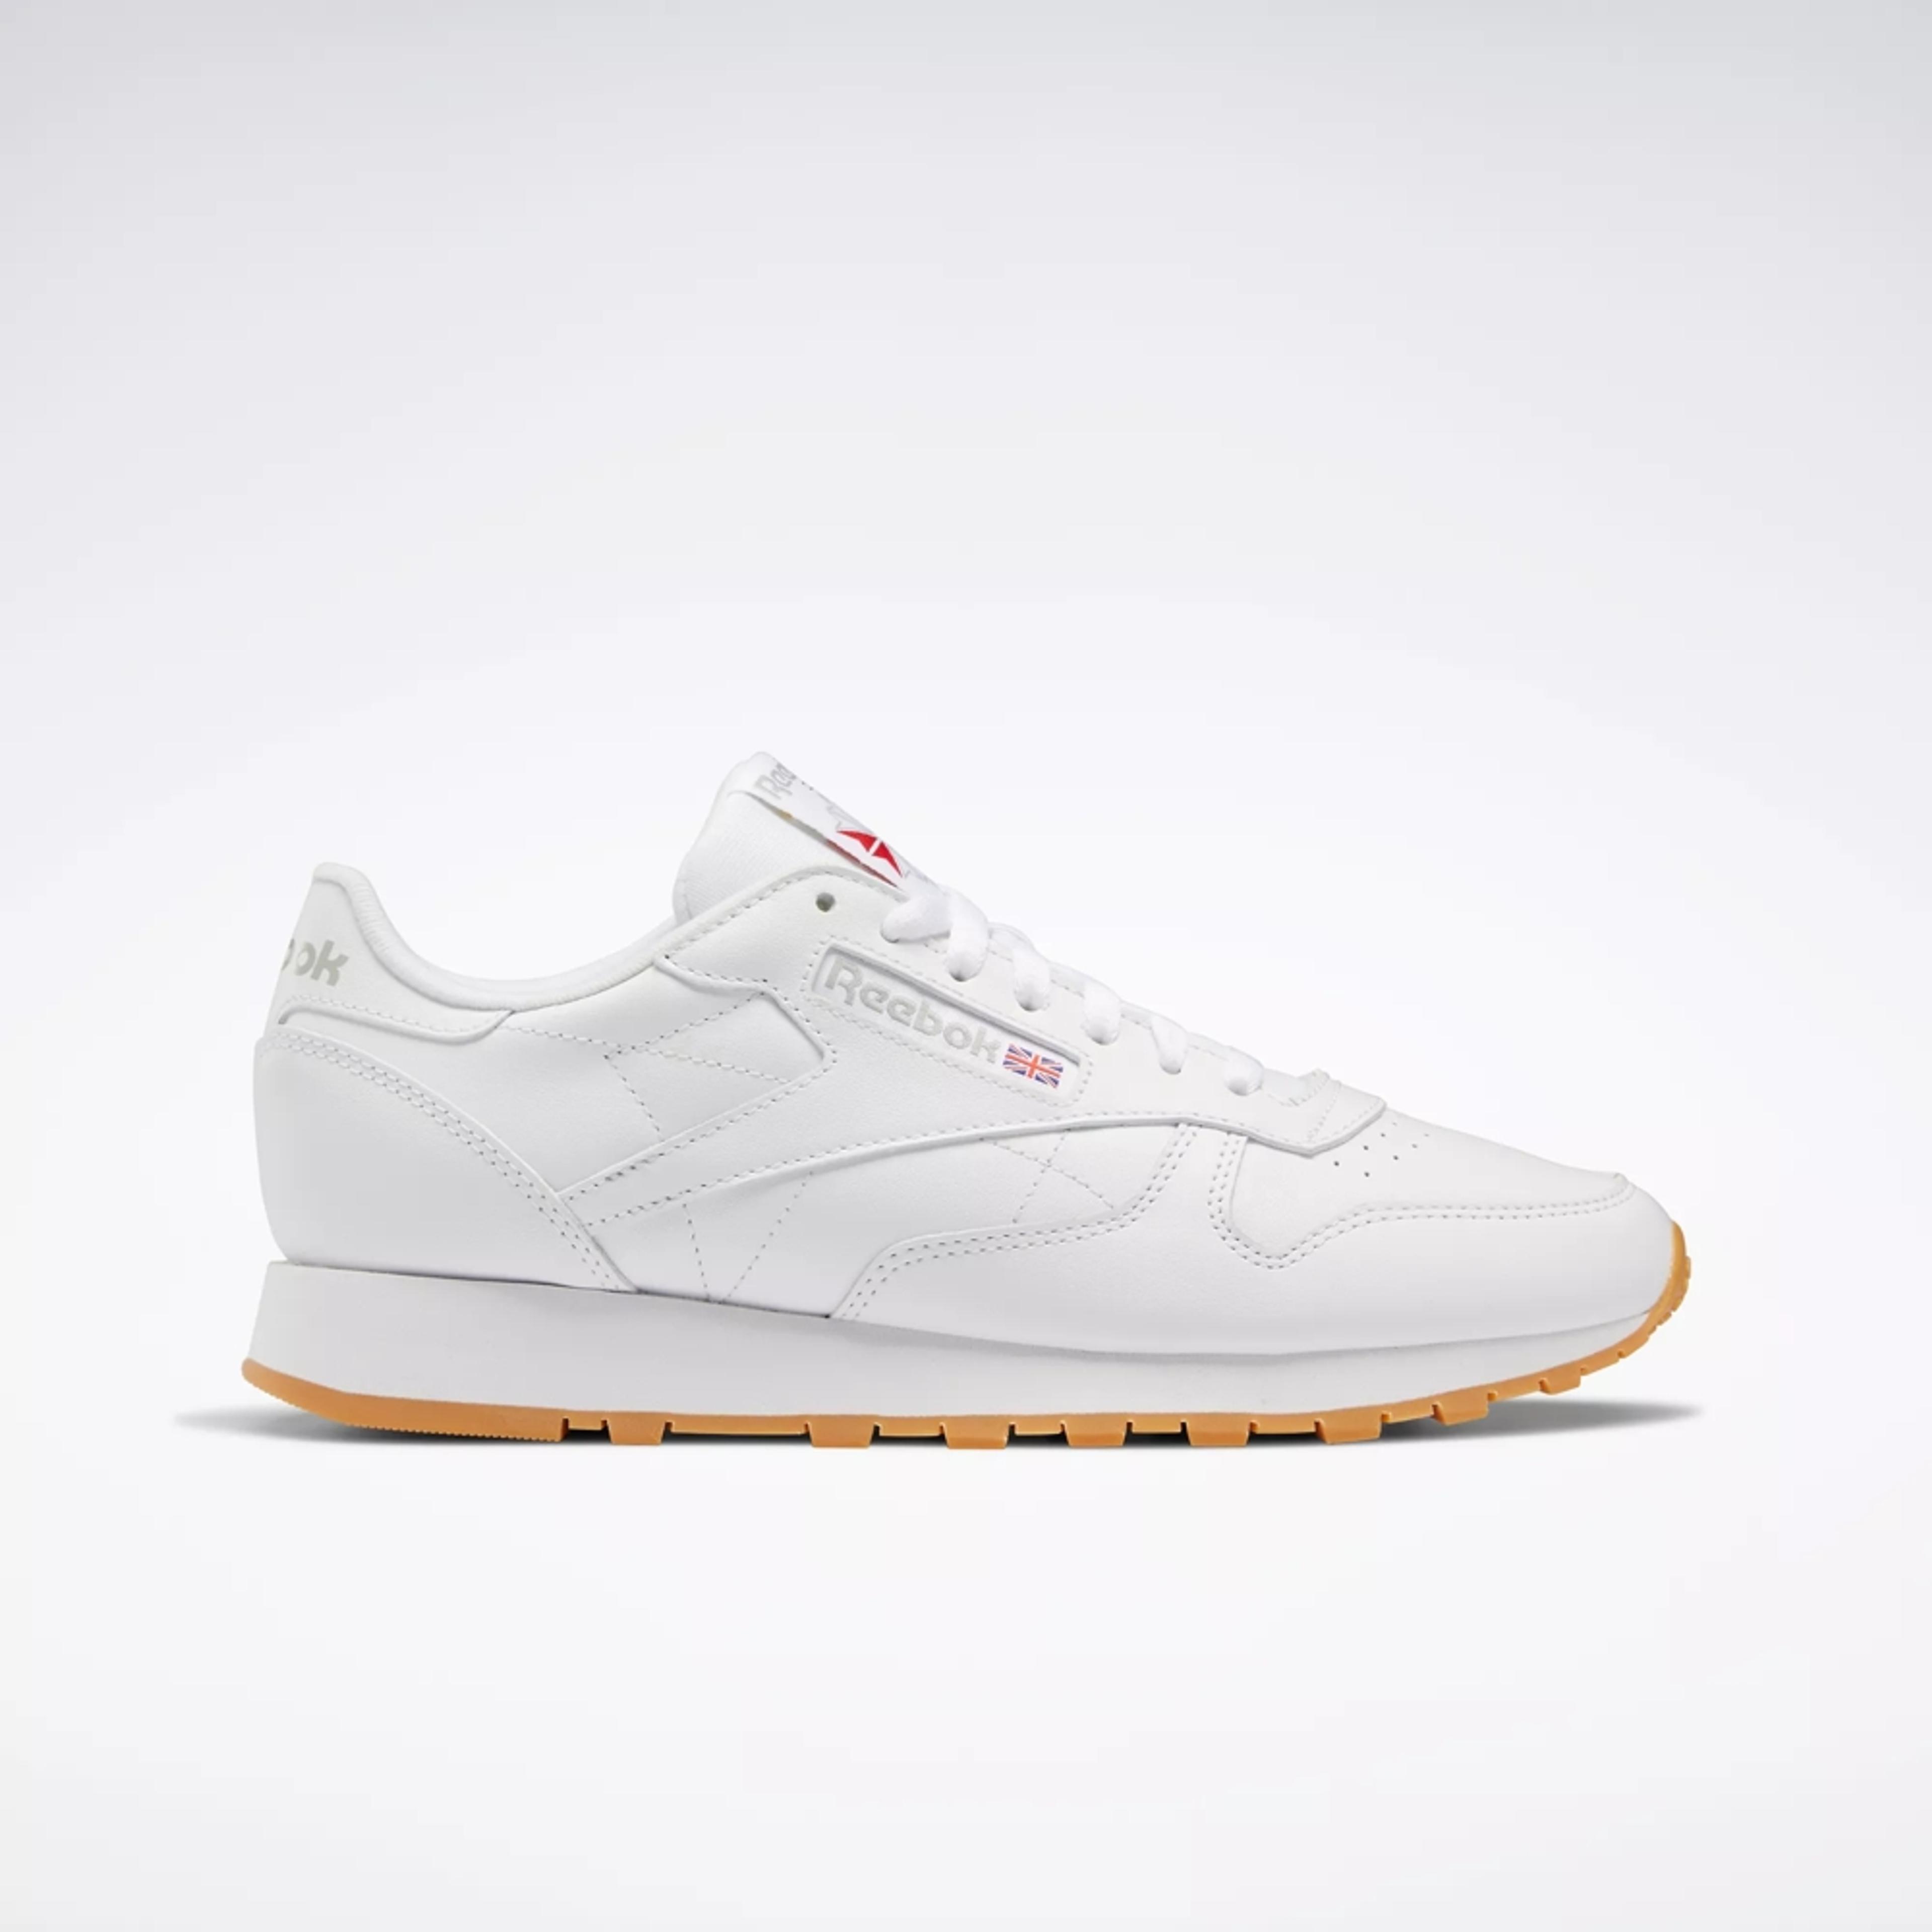 Classic Leather Shoes - Ftwr White / Pure Grey 3 / Reebok Rubber Gum-03 | Reebok